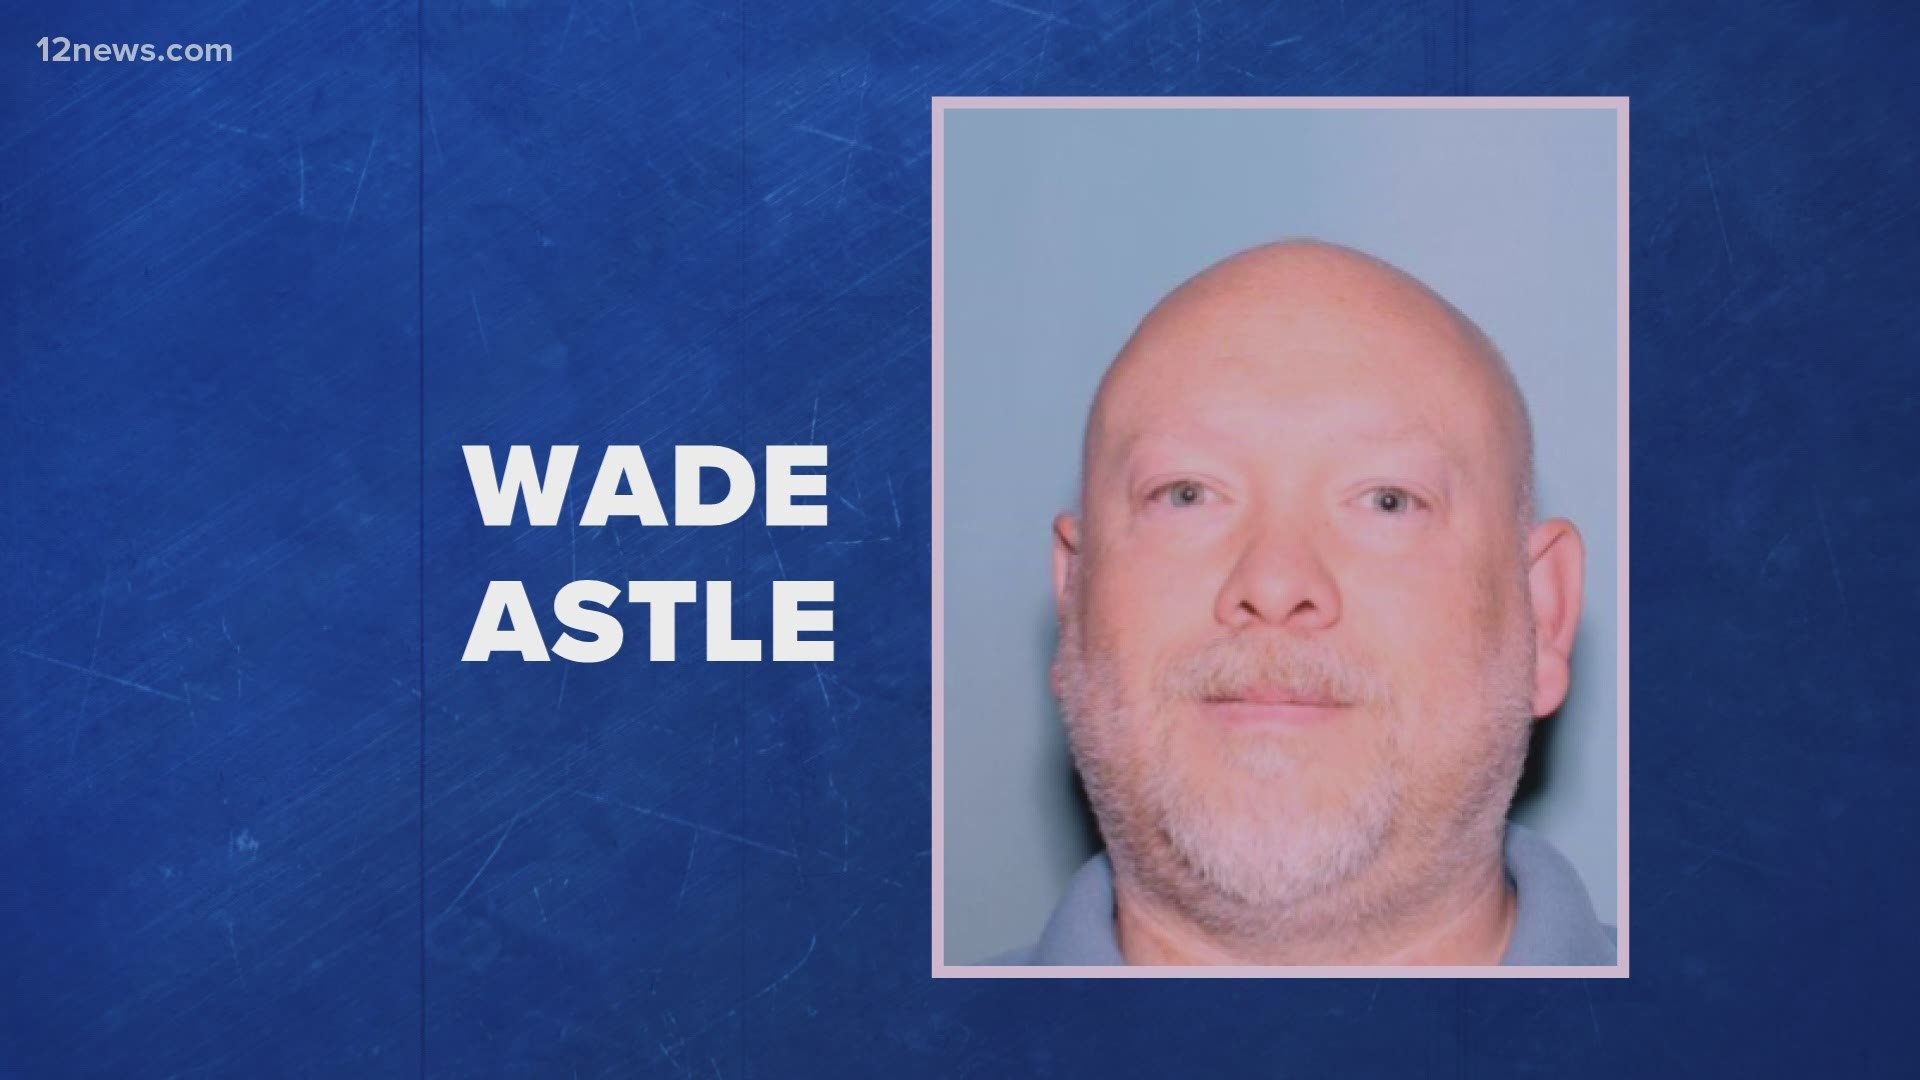 MCSO announced Thursday they arrested Wade Astle of Mesa. Astle was taken into custody in Vietnam. He's facing 10 counts of sexually exploiting a minor.